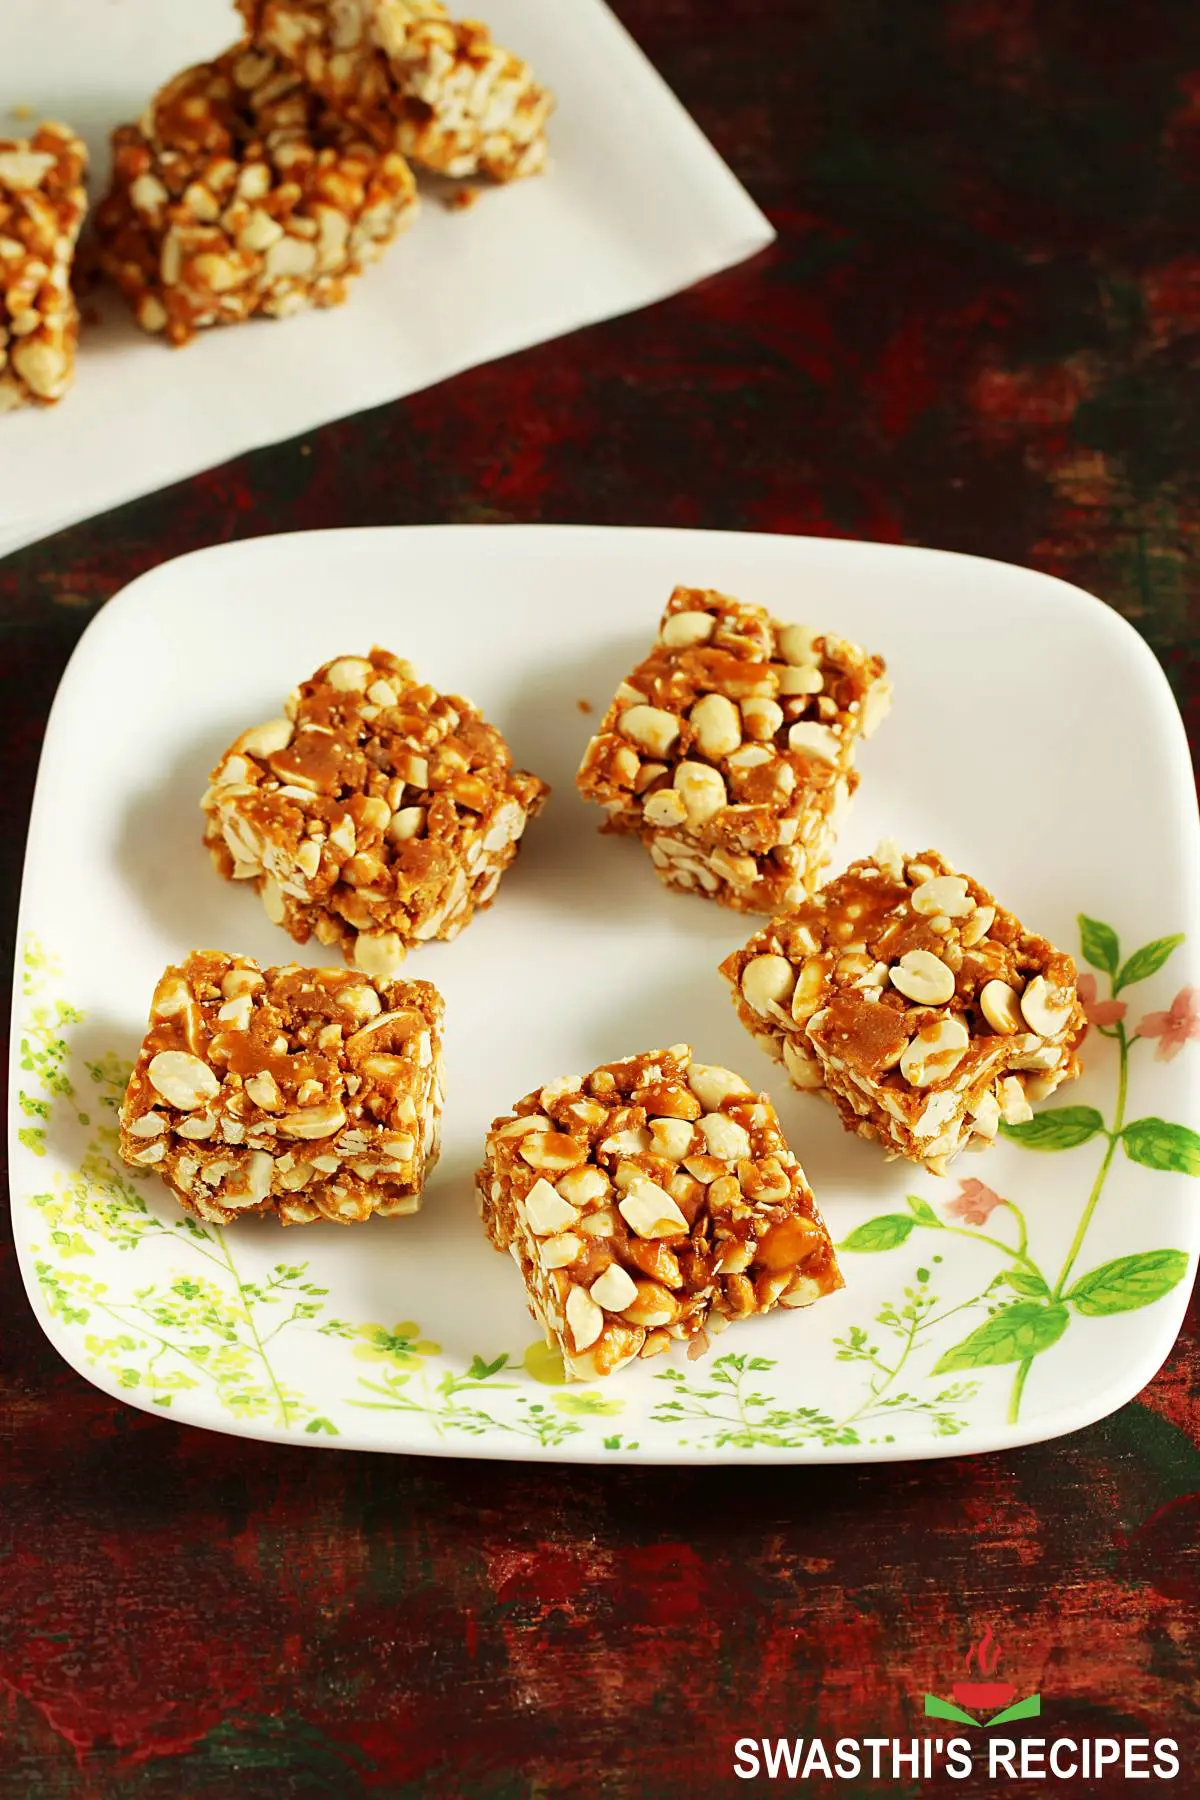 Chikki recipe made with peanuts and jaggery